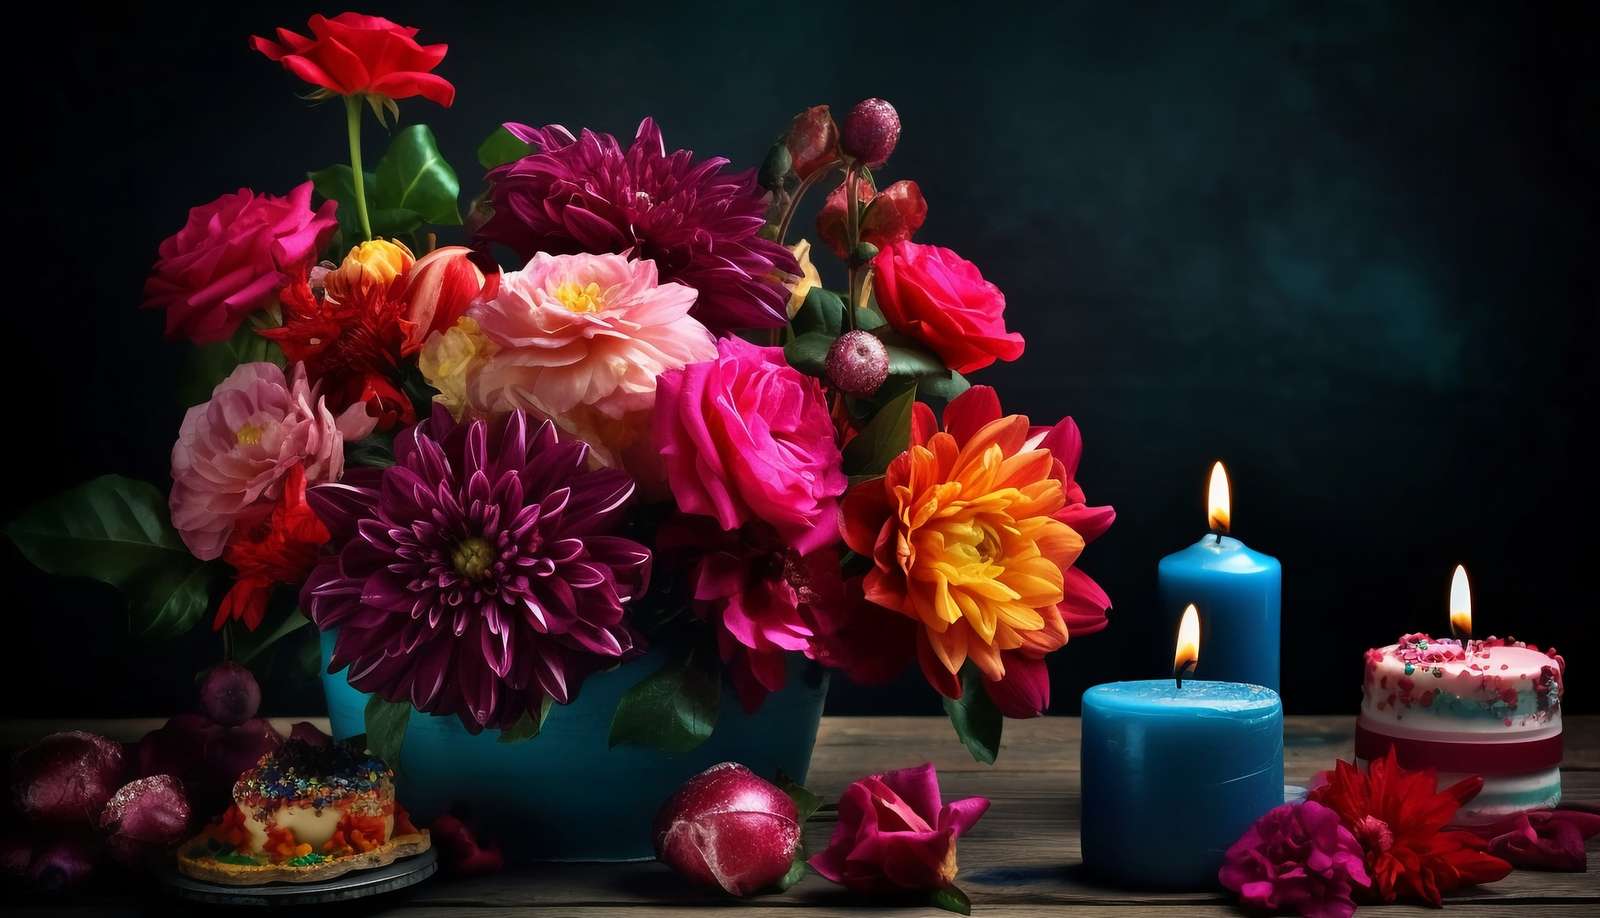 Candles next to a bouquet of colorful flowers online puzzle